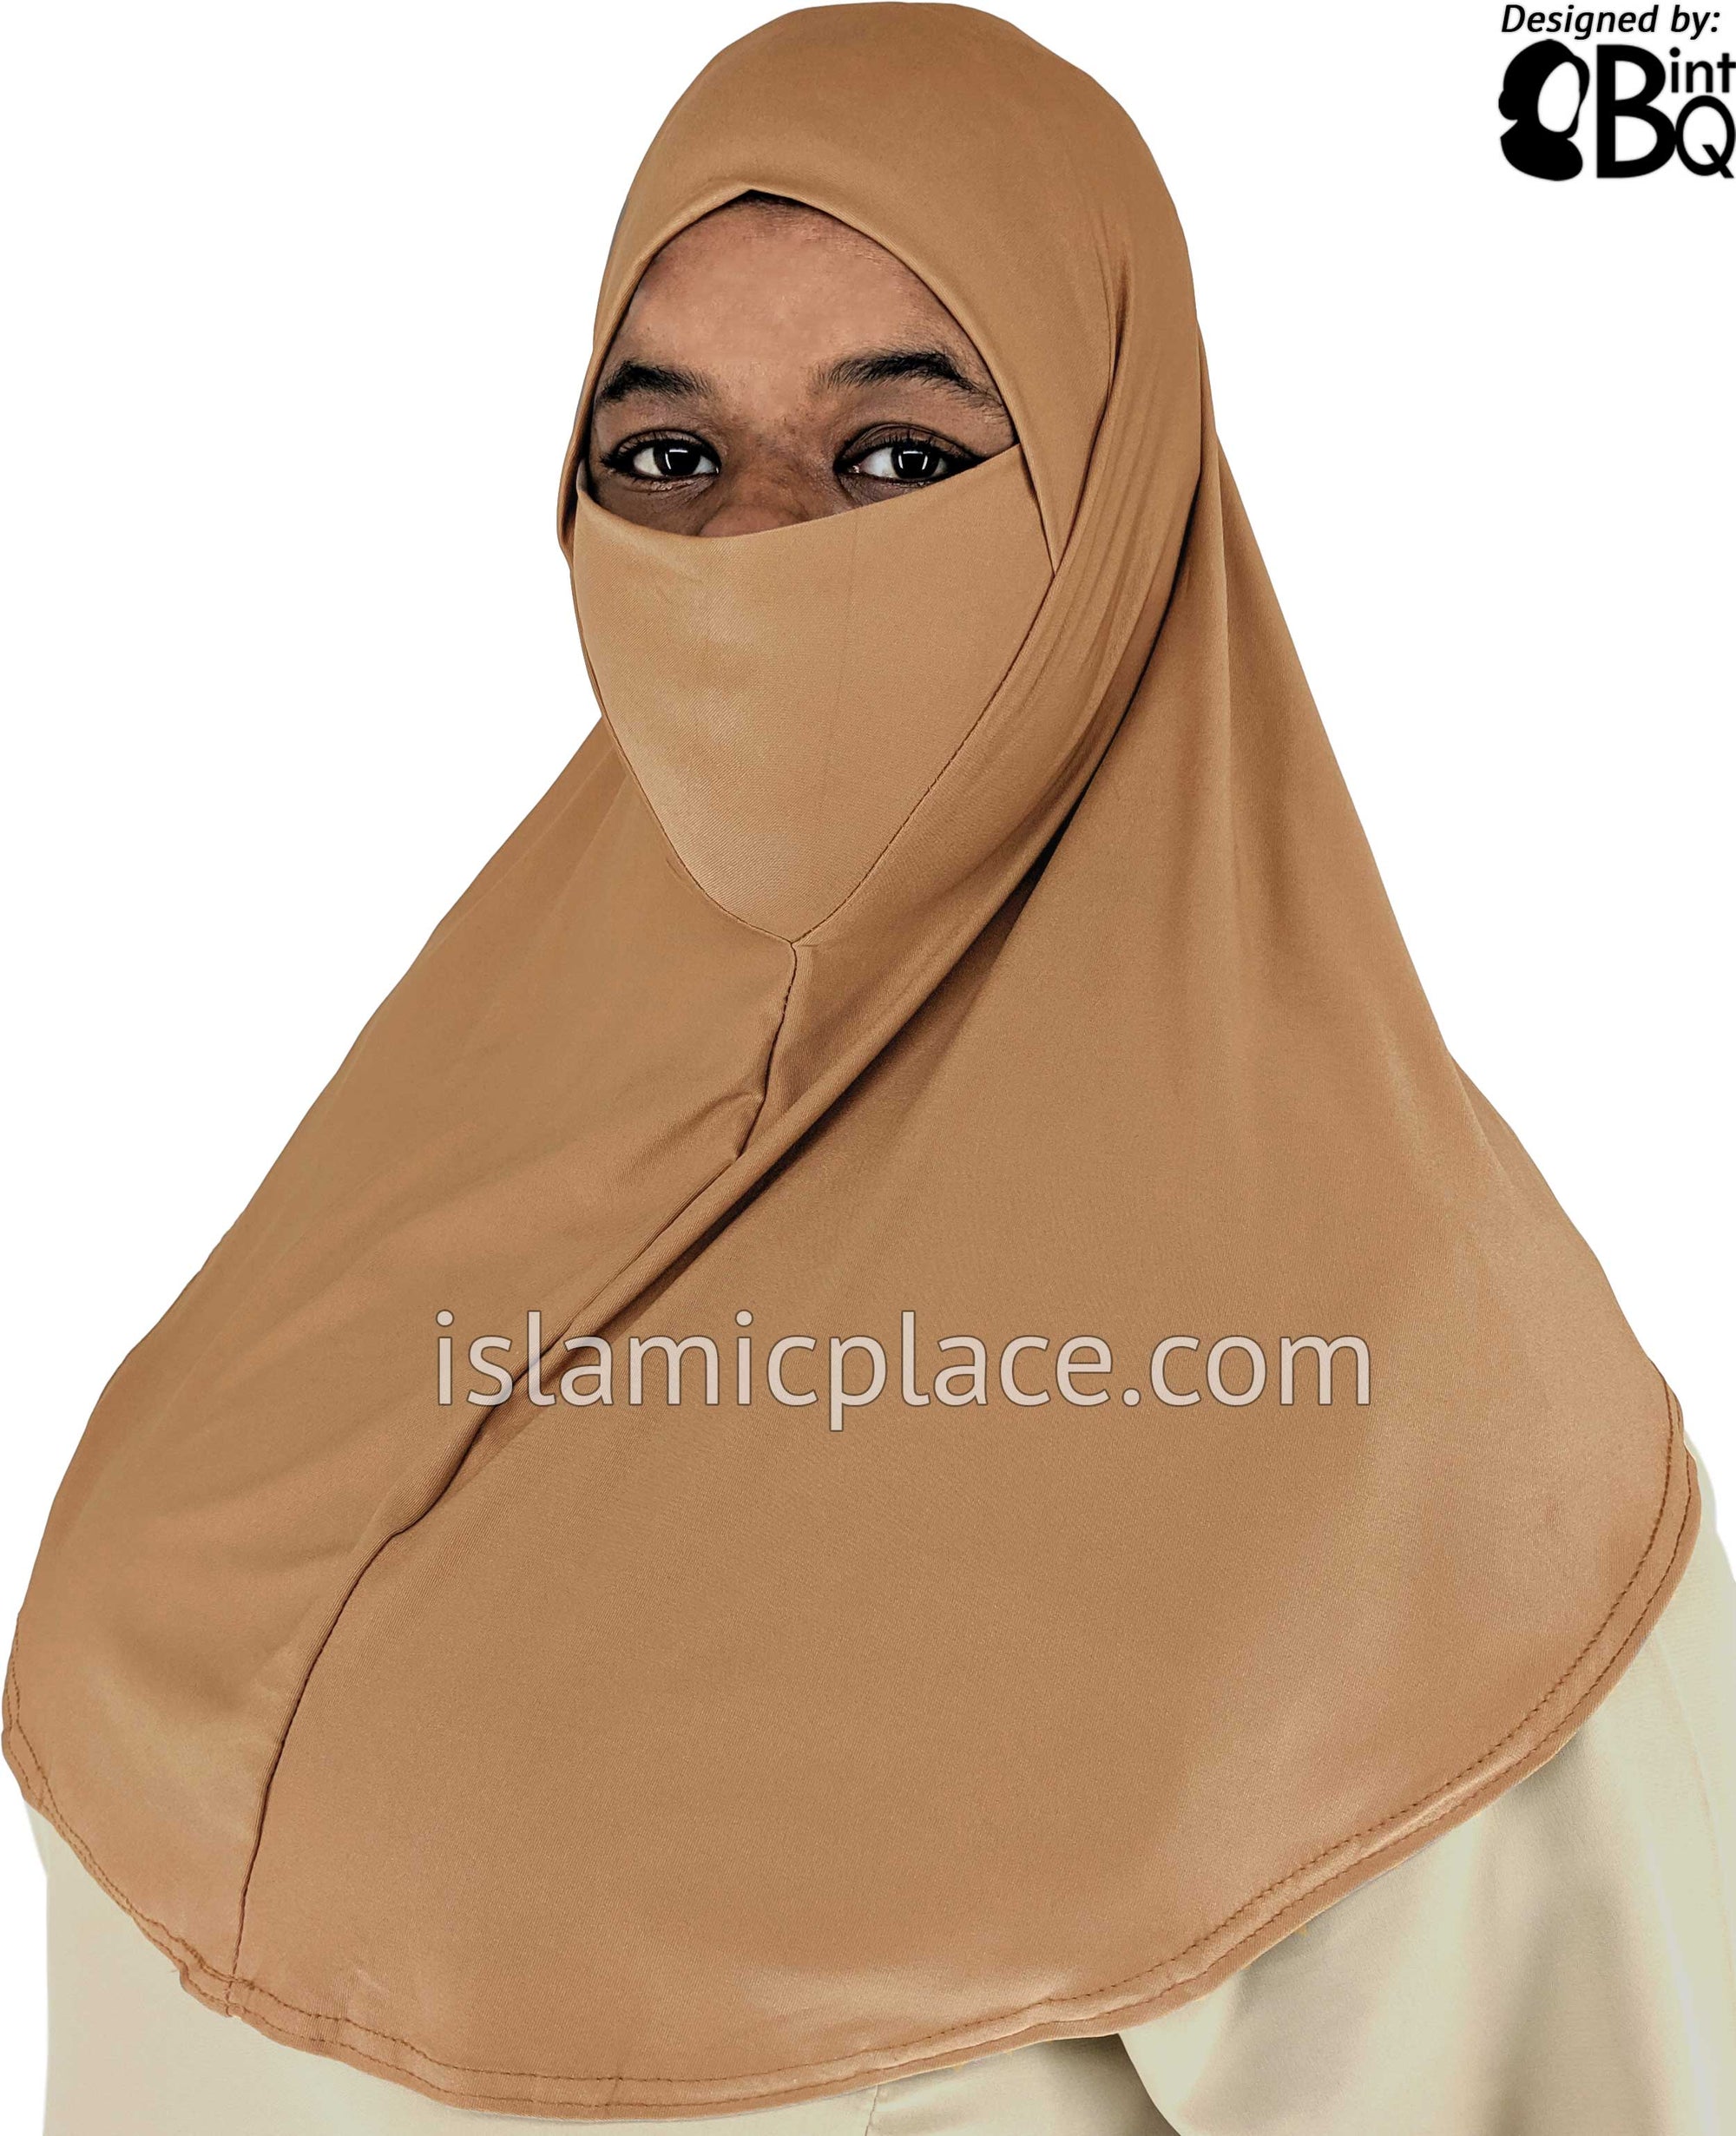 Oyster - Plain Teen to Adult (Large) Hijab Al-Amira with Built-in Niqab